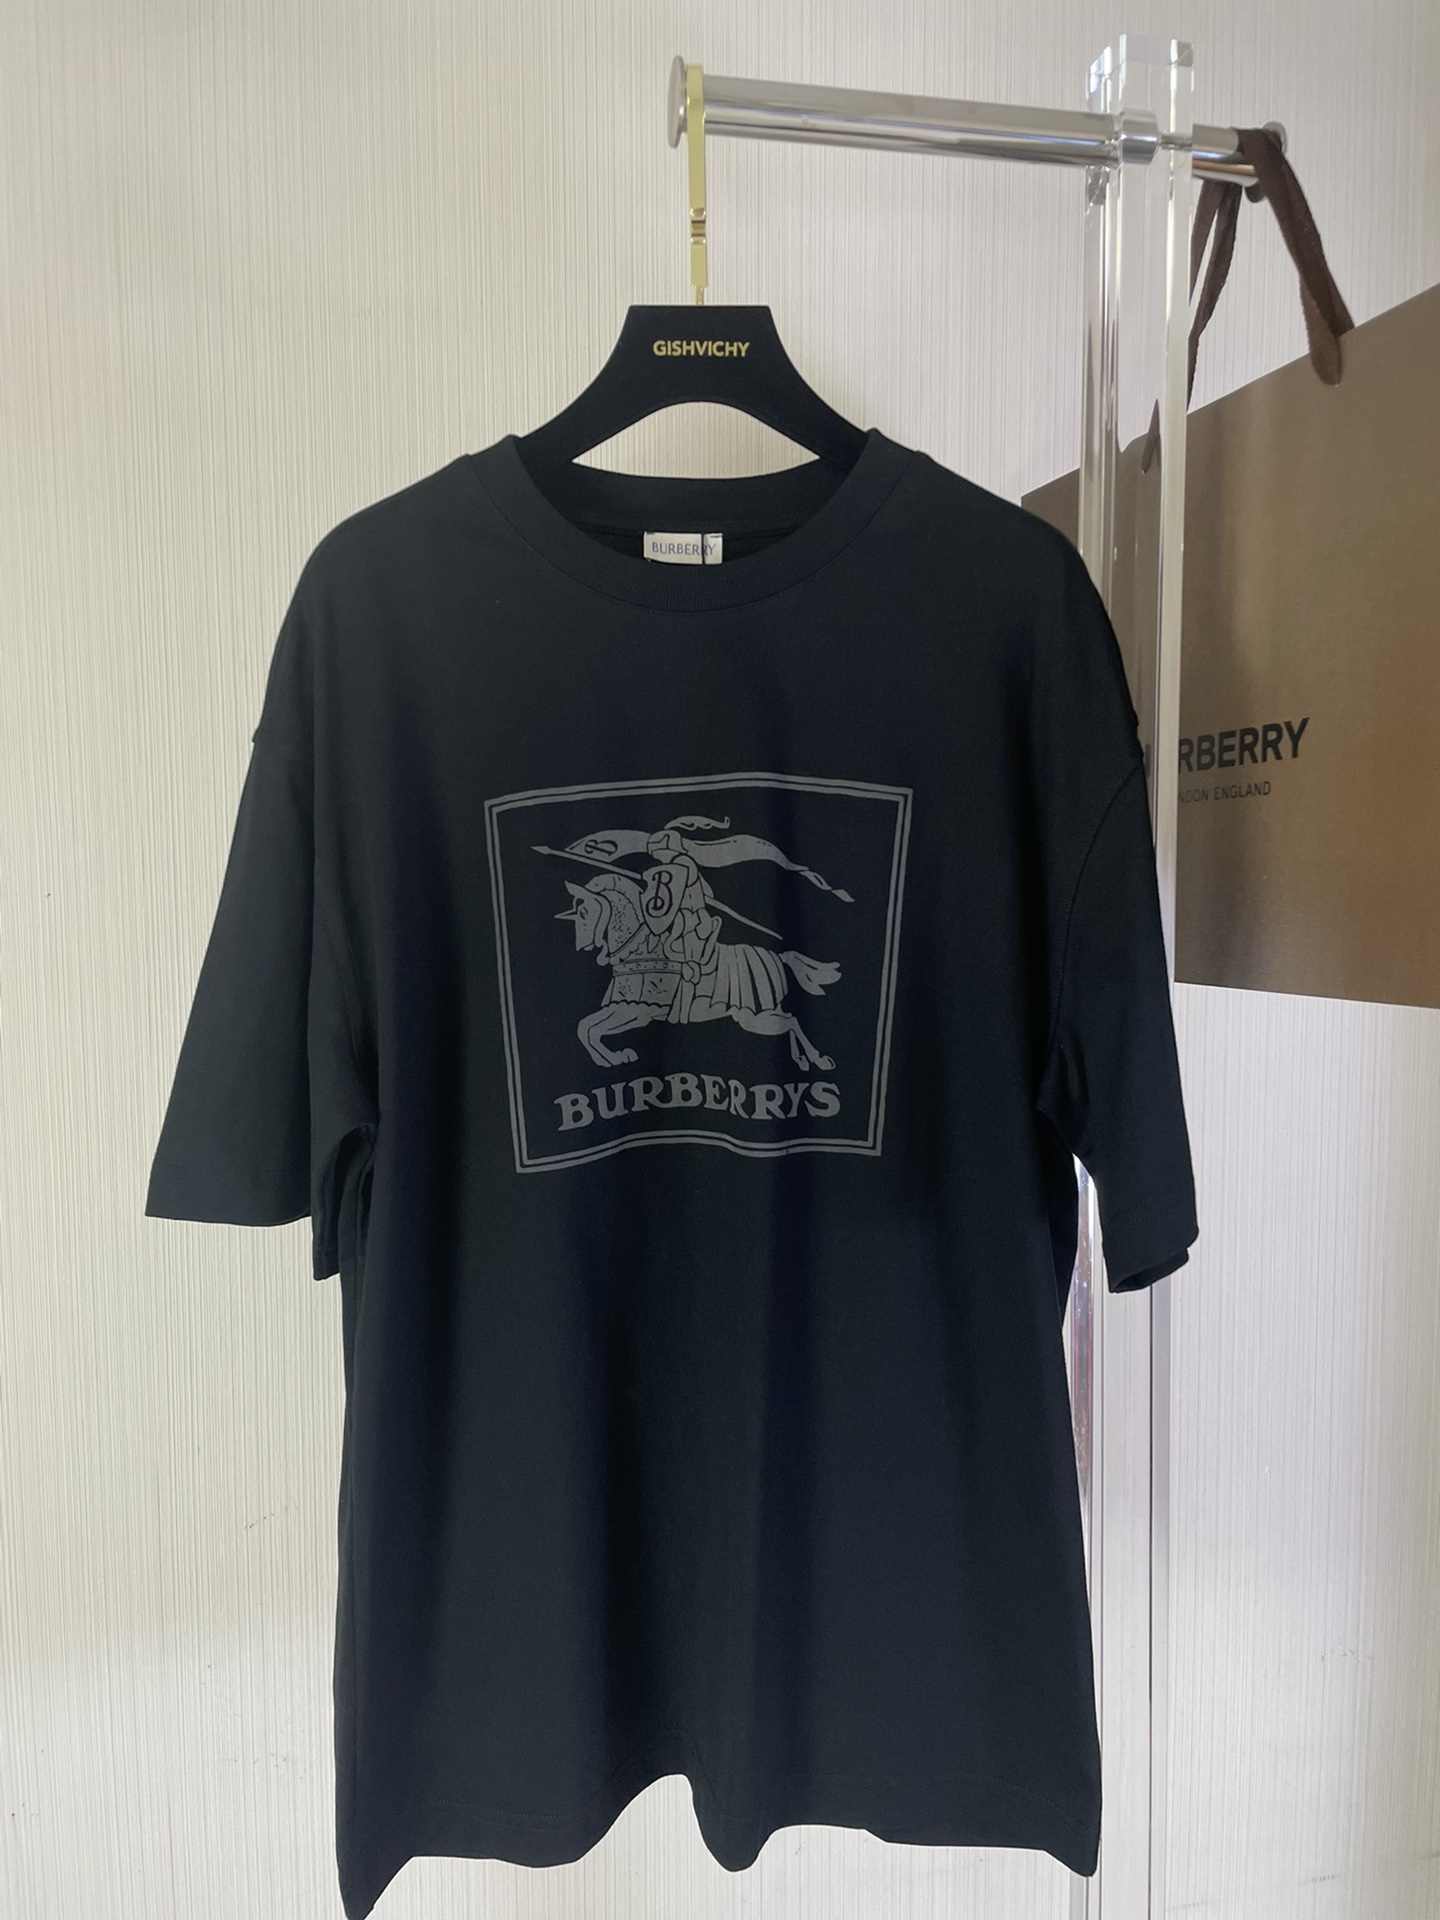 We provide Top Cheap AAA
 Burberry Buy
 Clothing T-Shirt Cotton Fabric Mercerized Short Sleeve